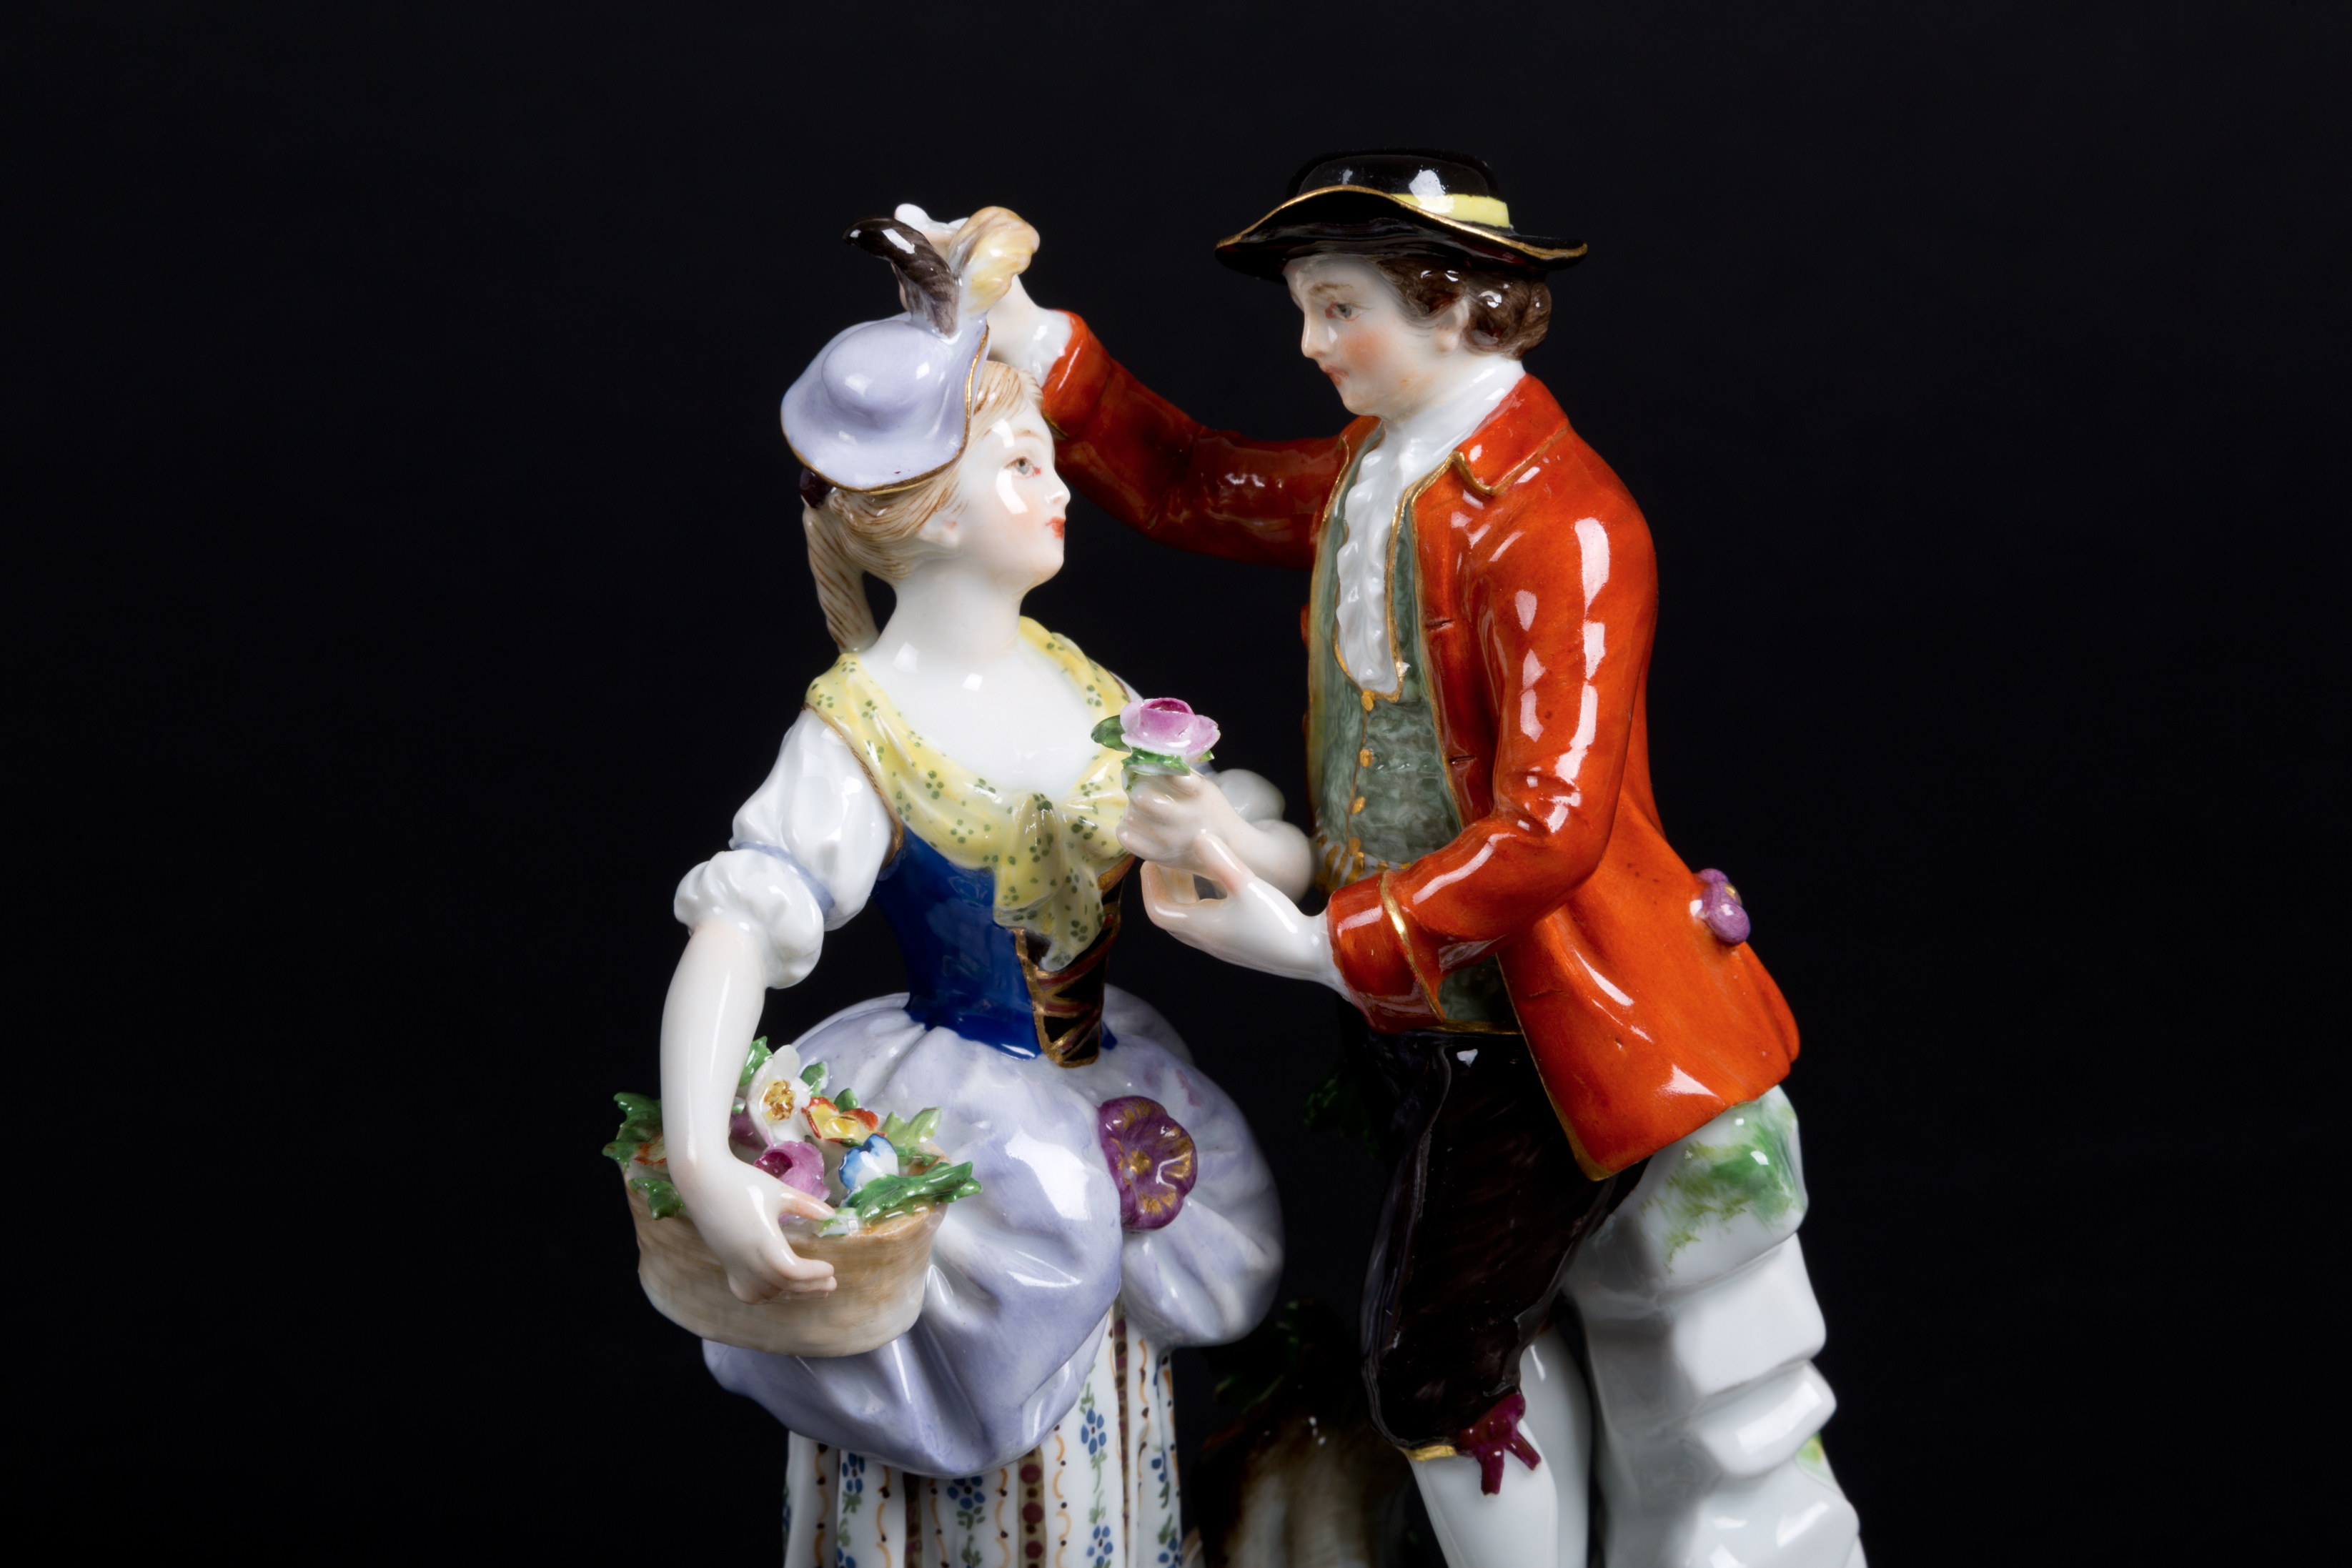 Meissen porcelain figurine. Late 18th-early 19th ce. - Image 2 of 5